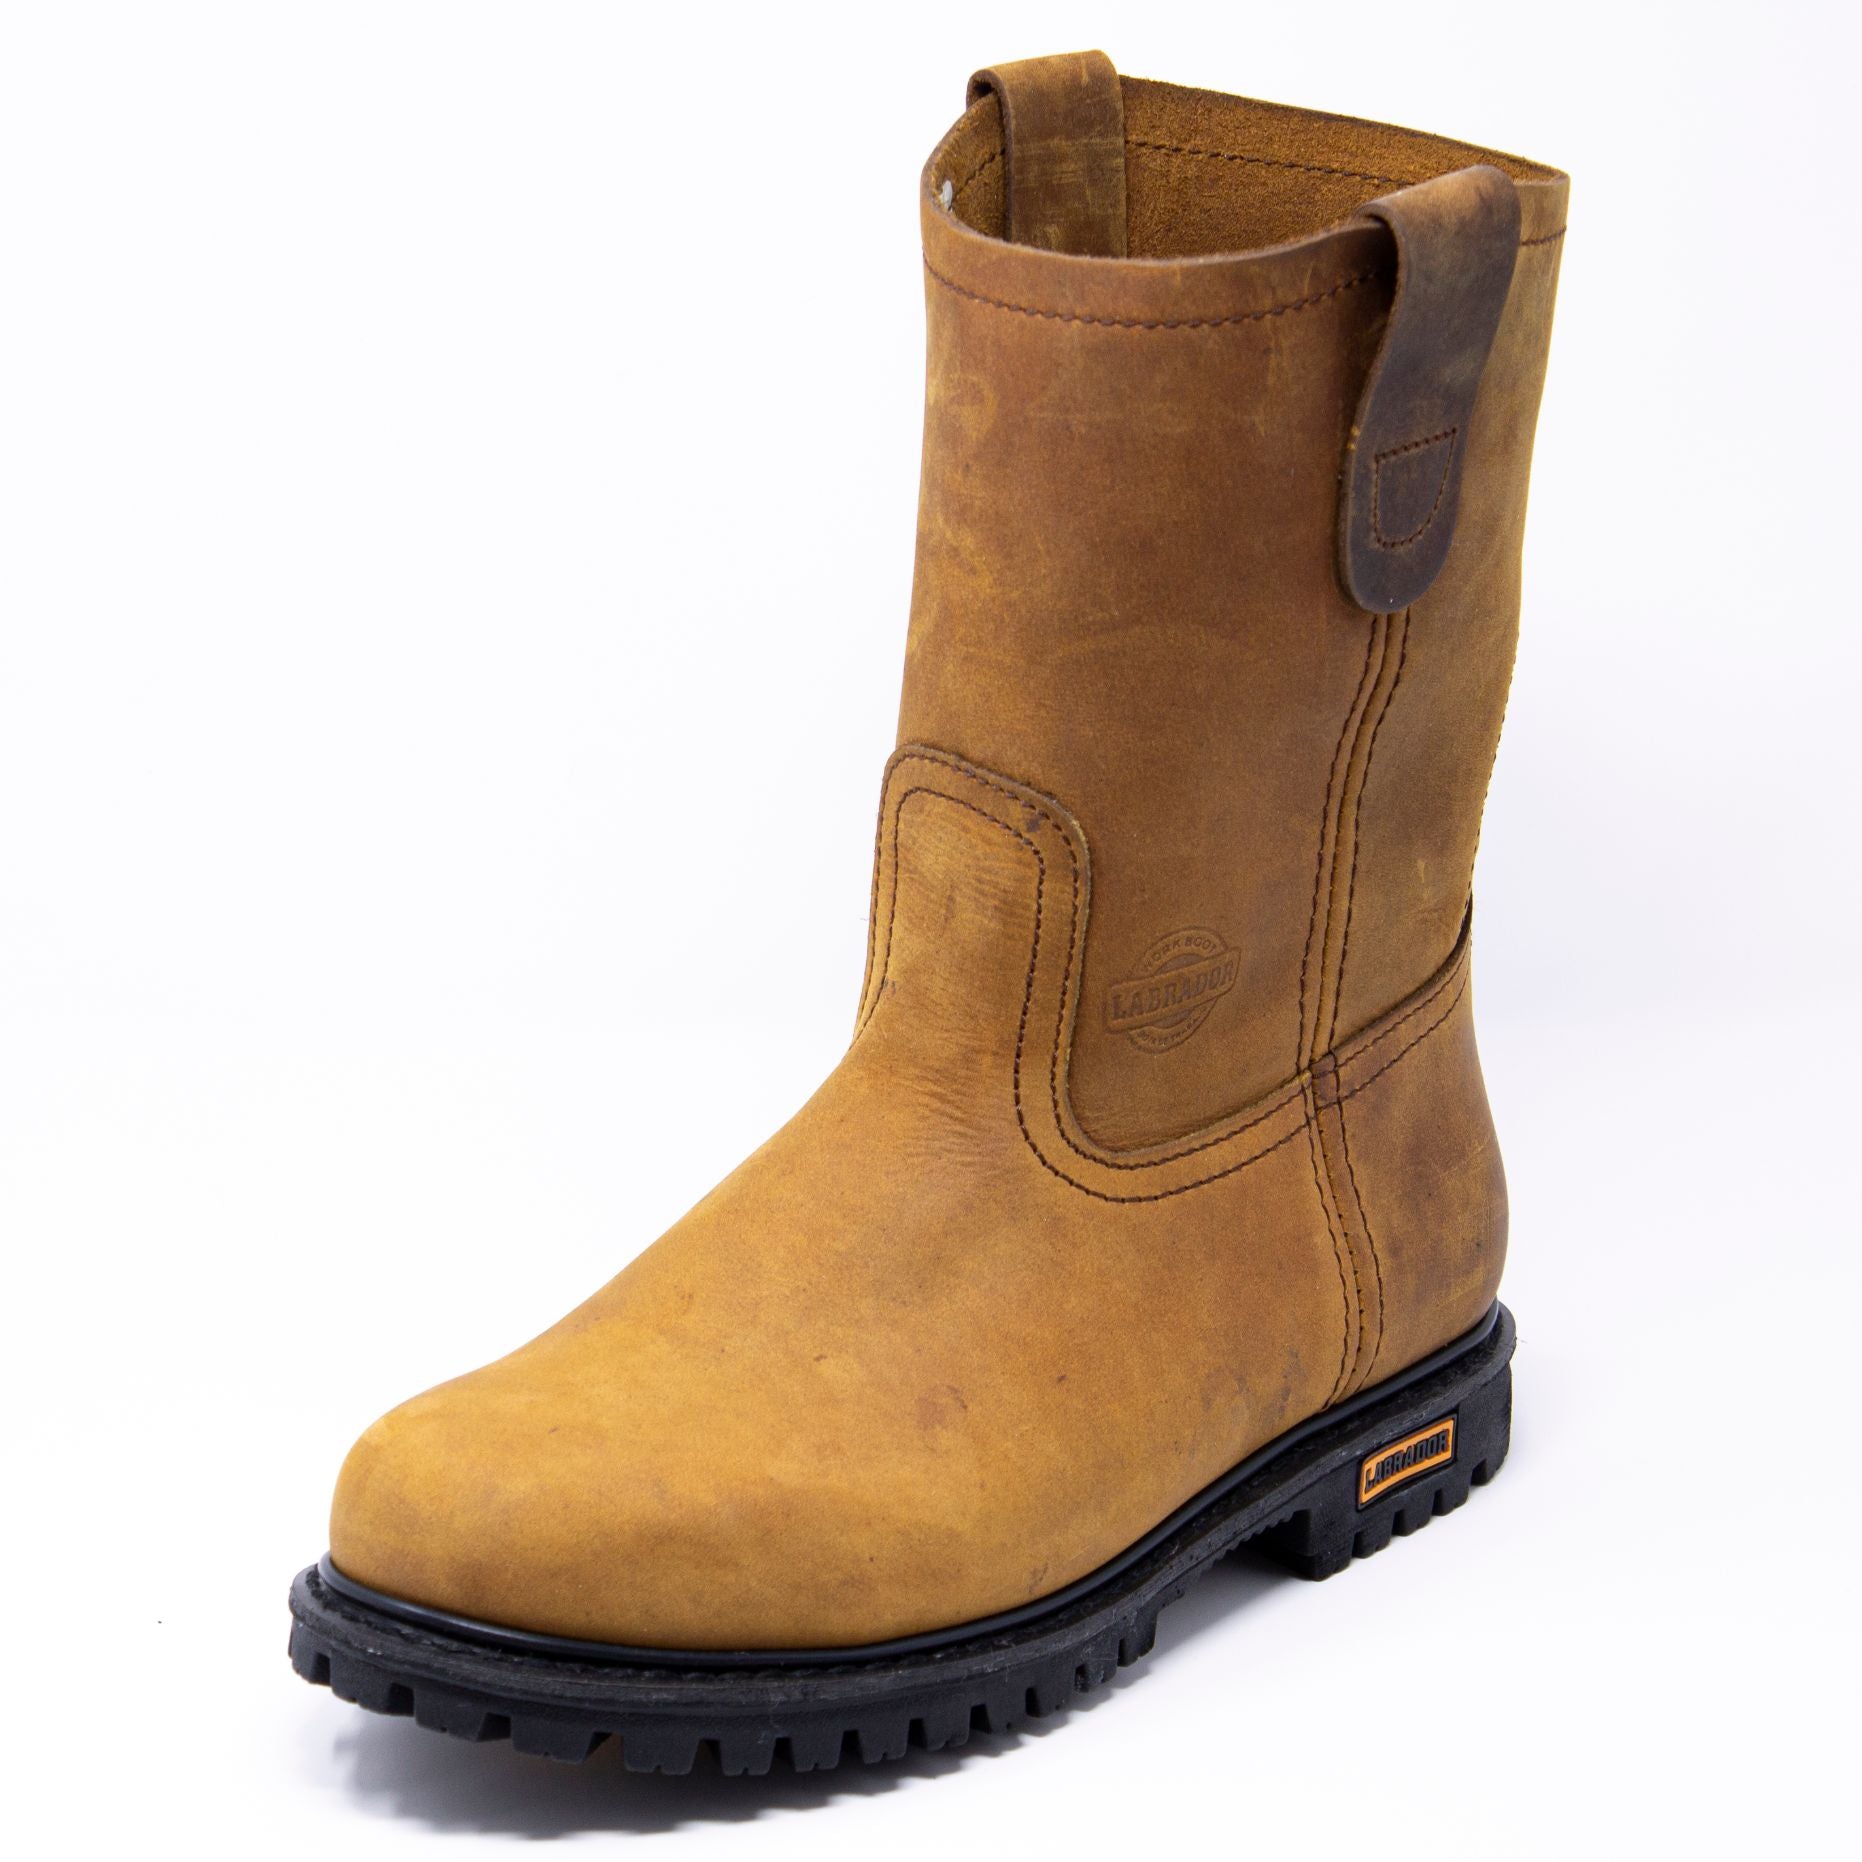 Men's TRACK - Soft Toe 10" Pull On Work Boots